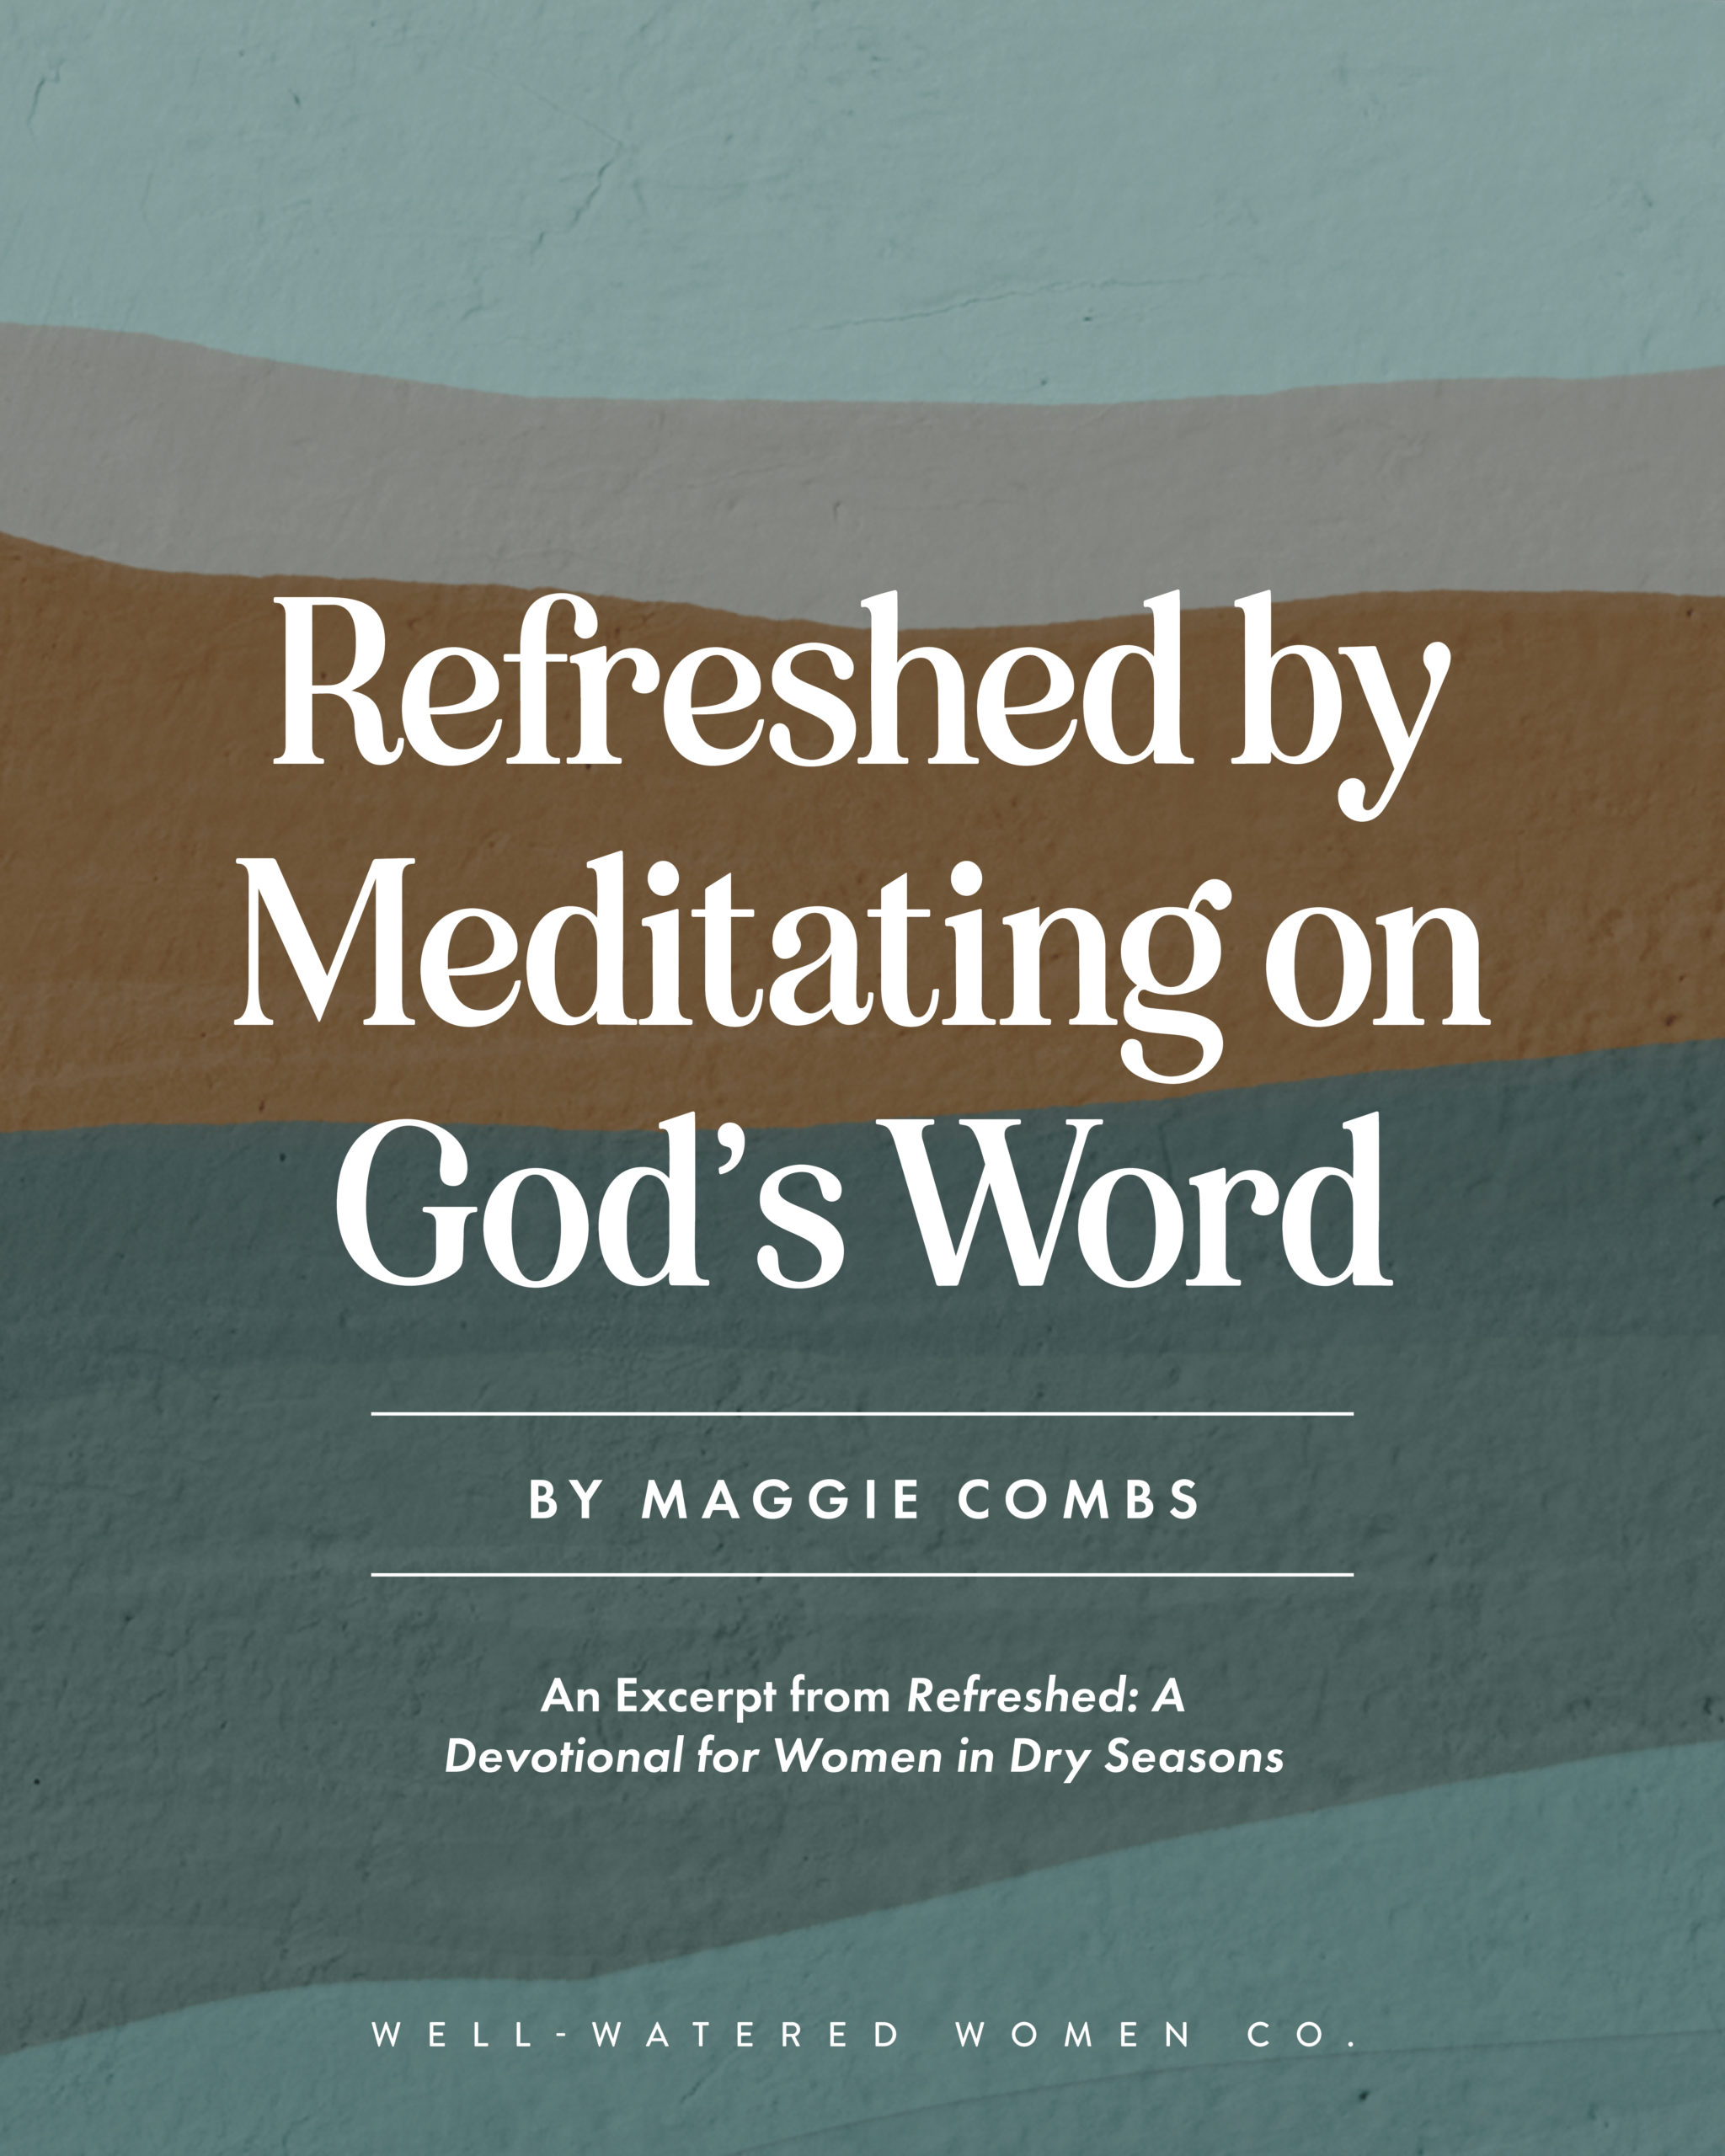 Refreshed by Meditating on God's Word - an article from Well-Watered Women